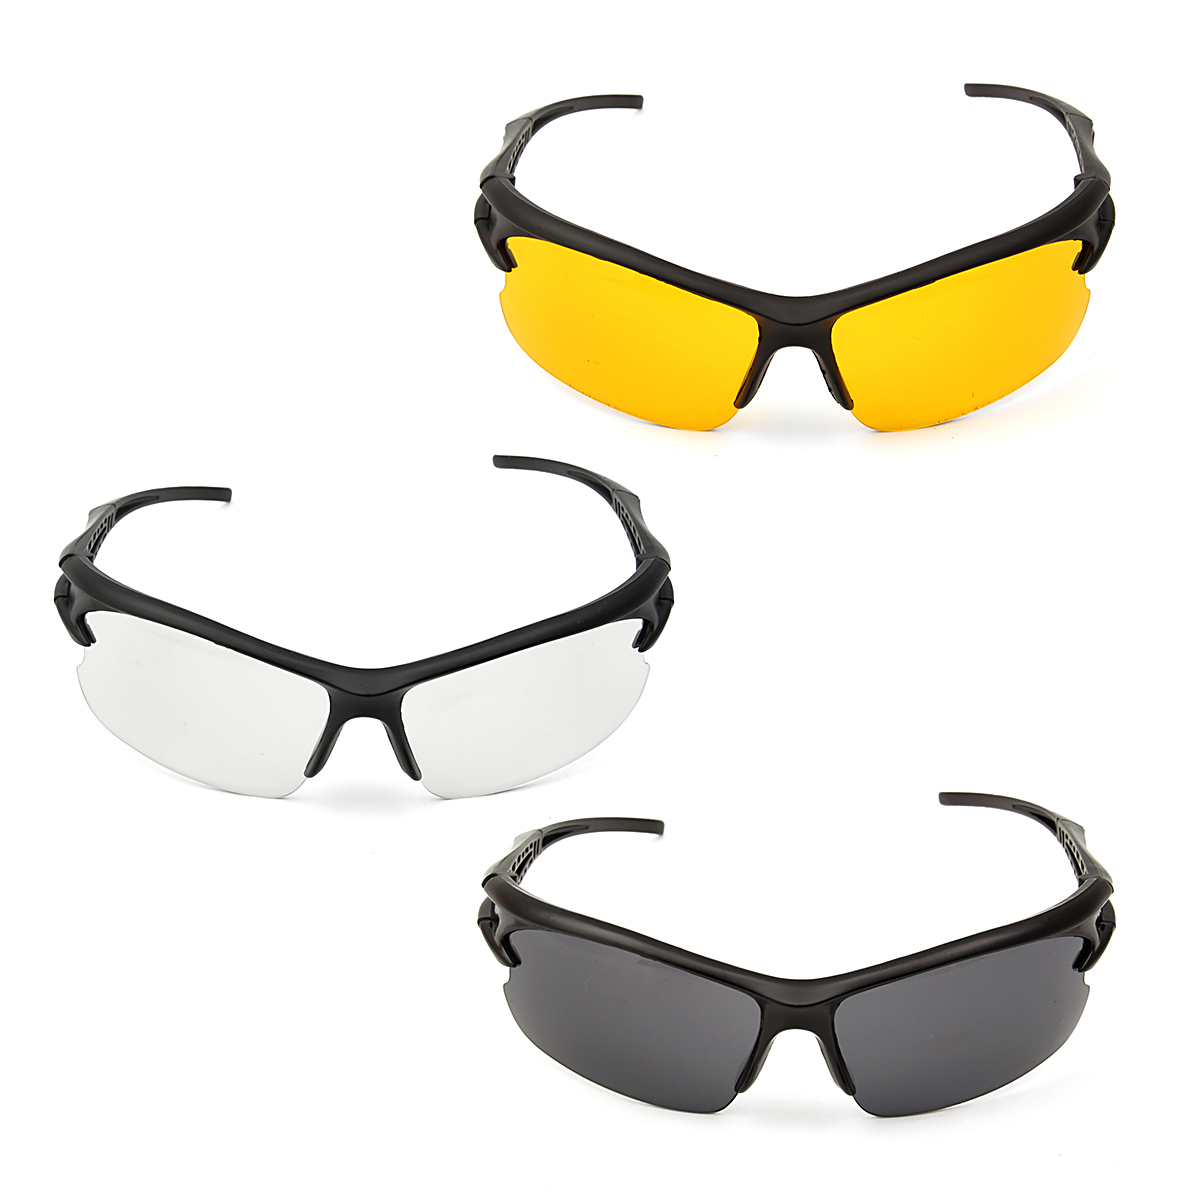 

Wind and Dust Protective Goggles Glasses Eyewear Eyes Protection Anti-fog